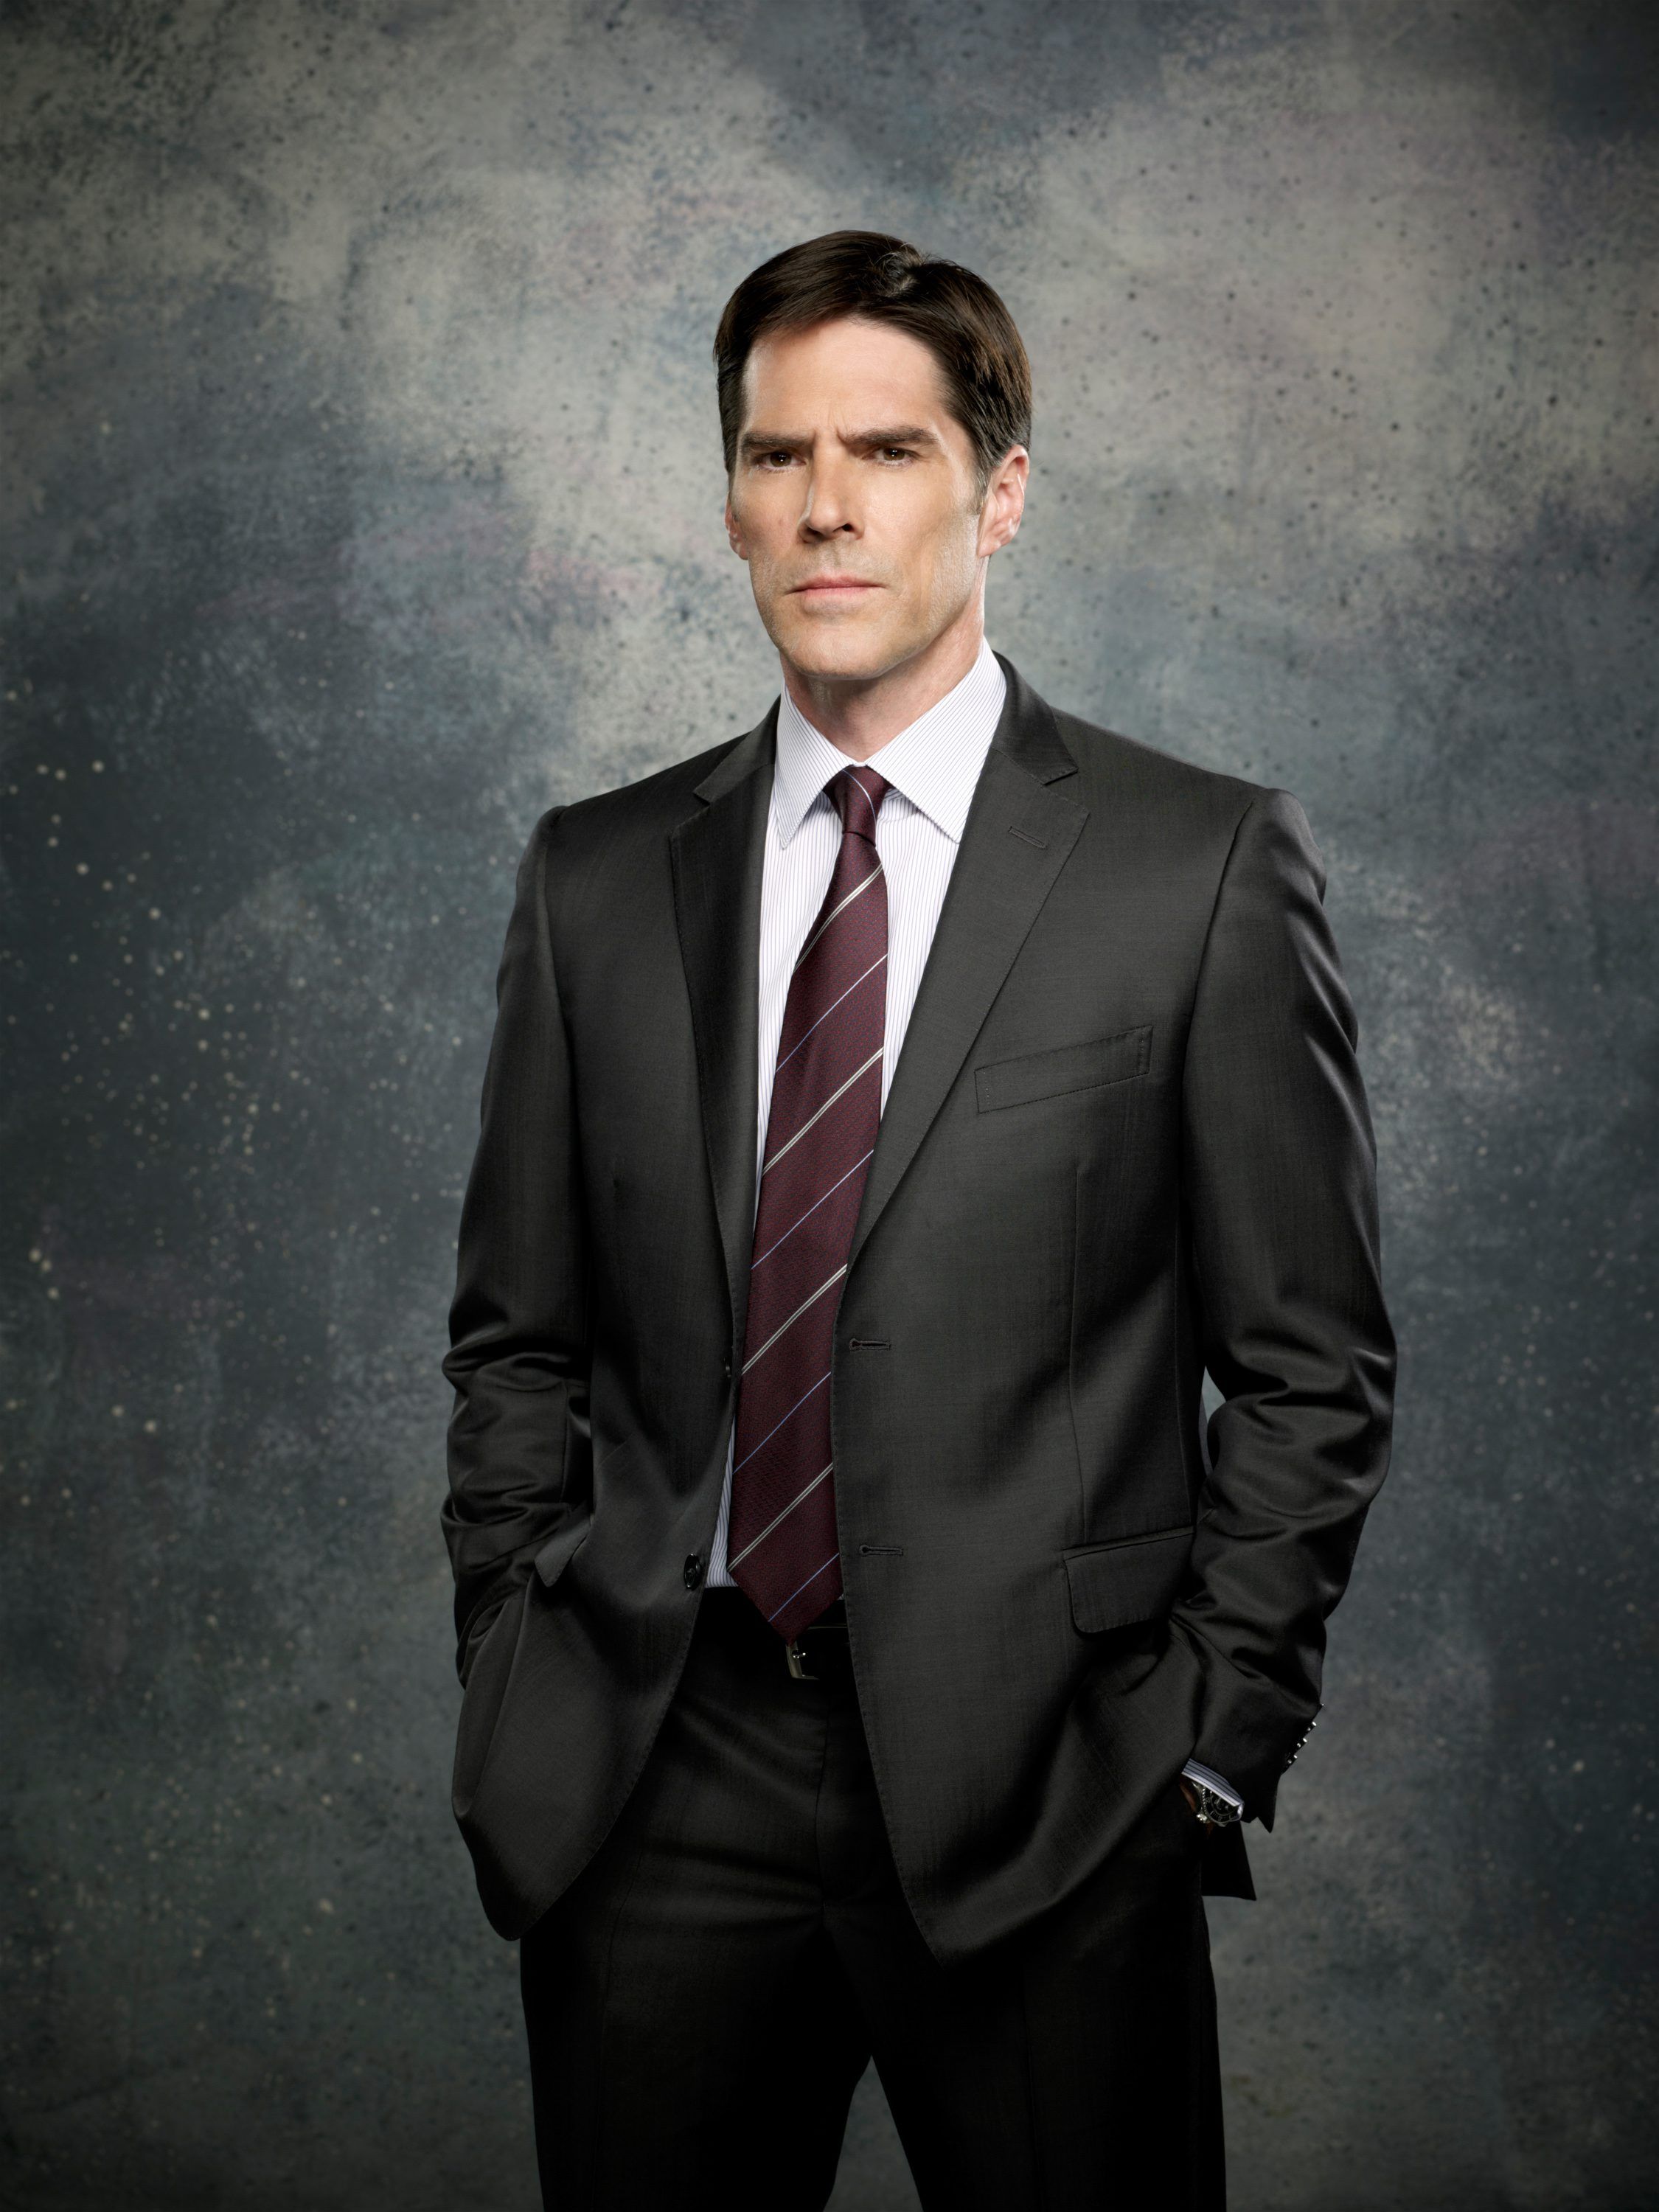 10 Things You Didn't Know About Thomas Gibson Fame10